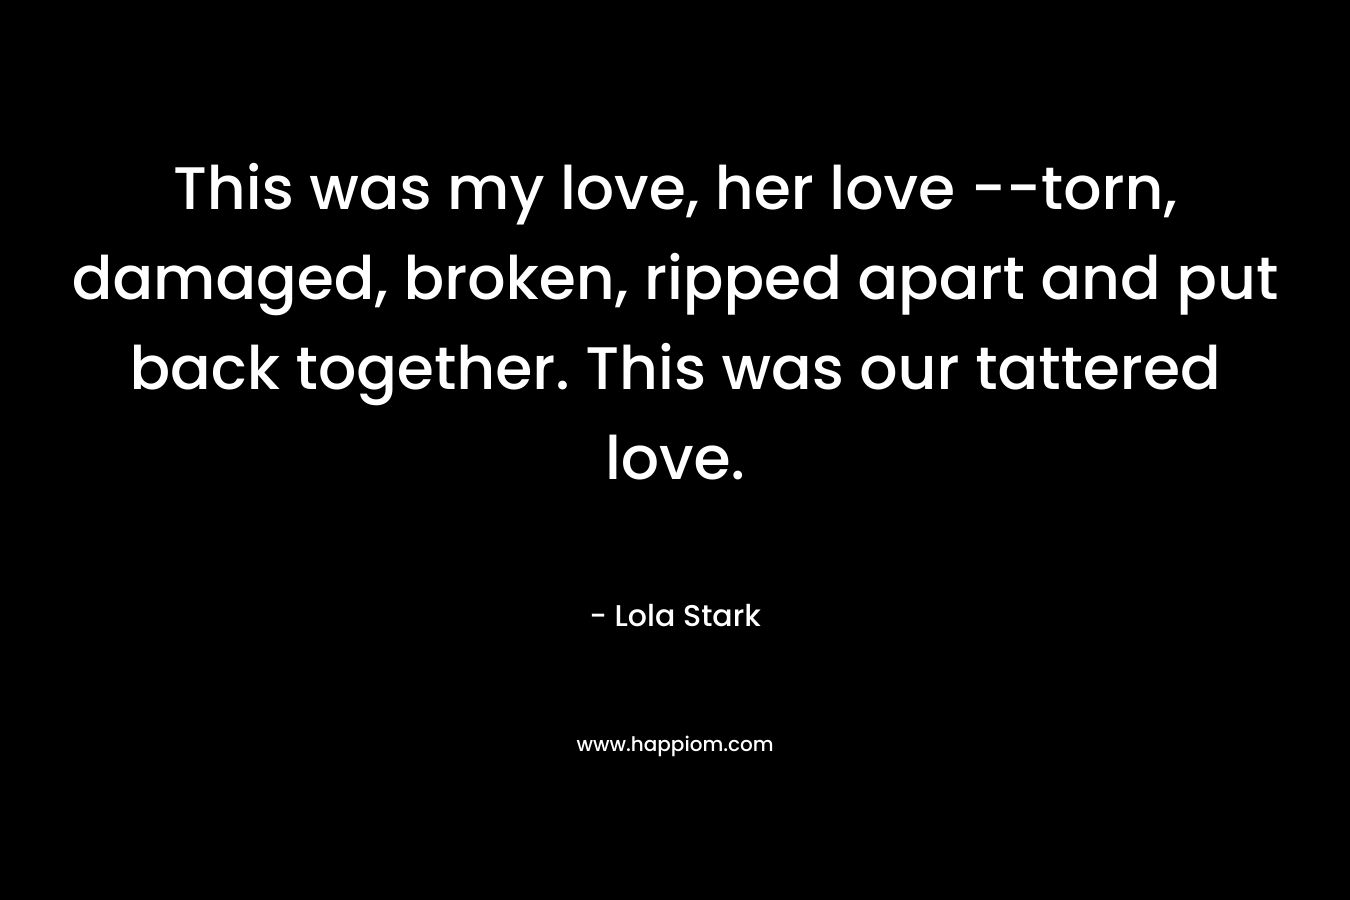 This was my love, her love –torn, damaged, broken, ripped apart and put back together. This was our tattered love. – Lola Stark